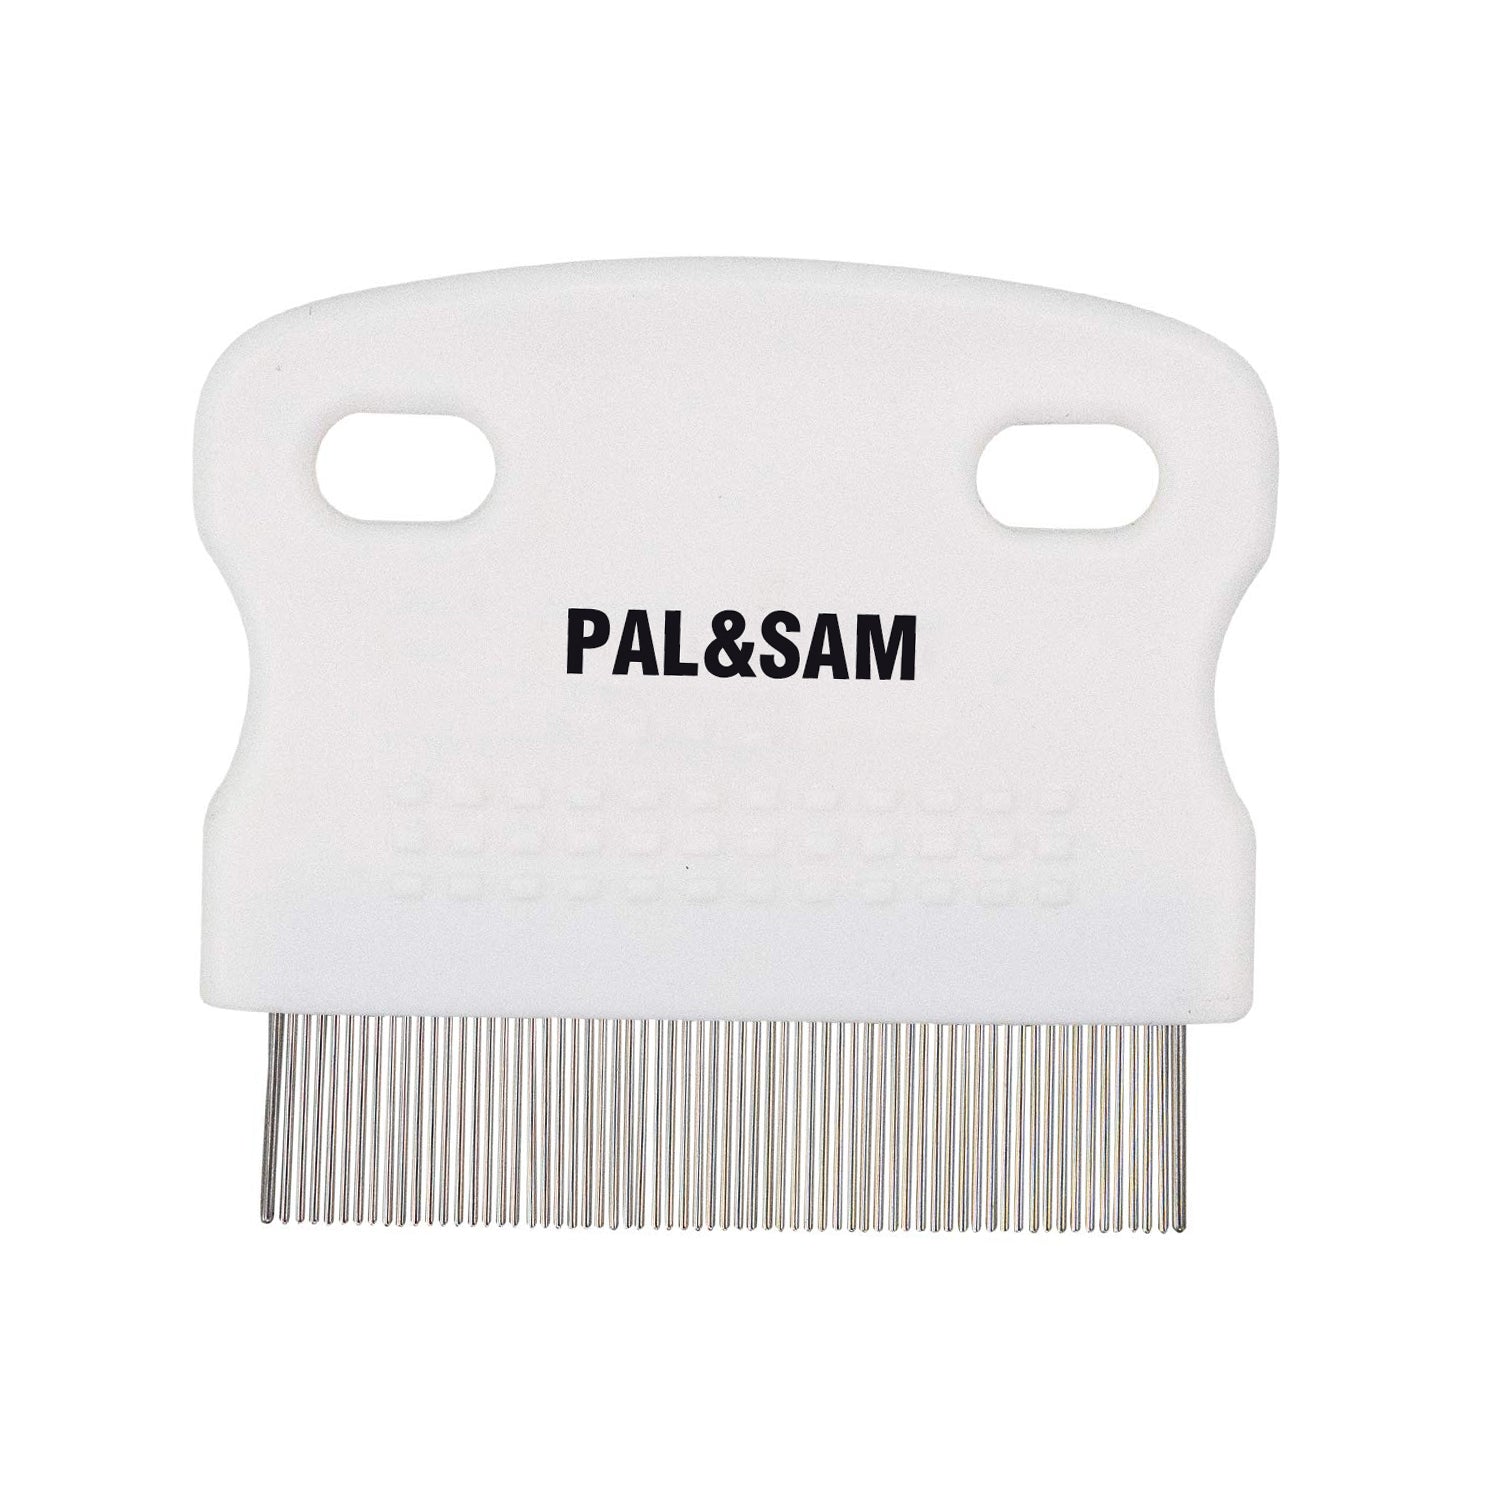 PAL&SAM Metal Comb Tear Stain Remover